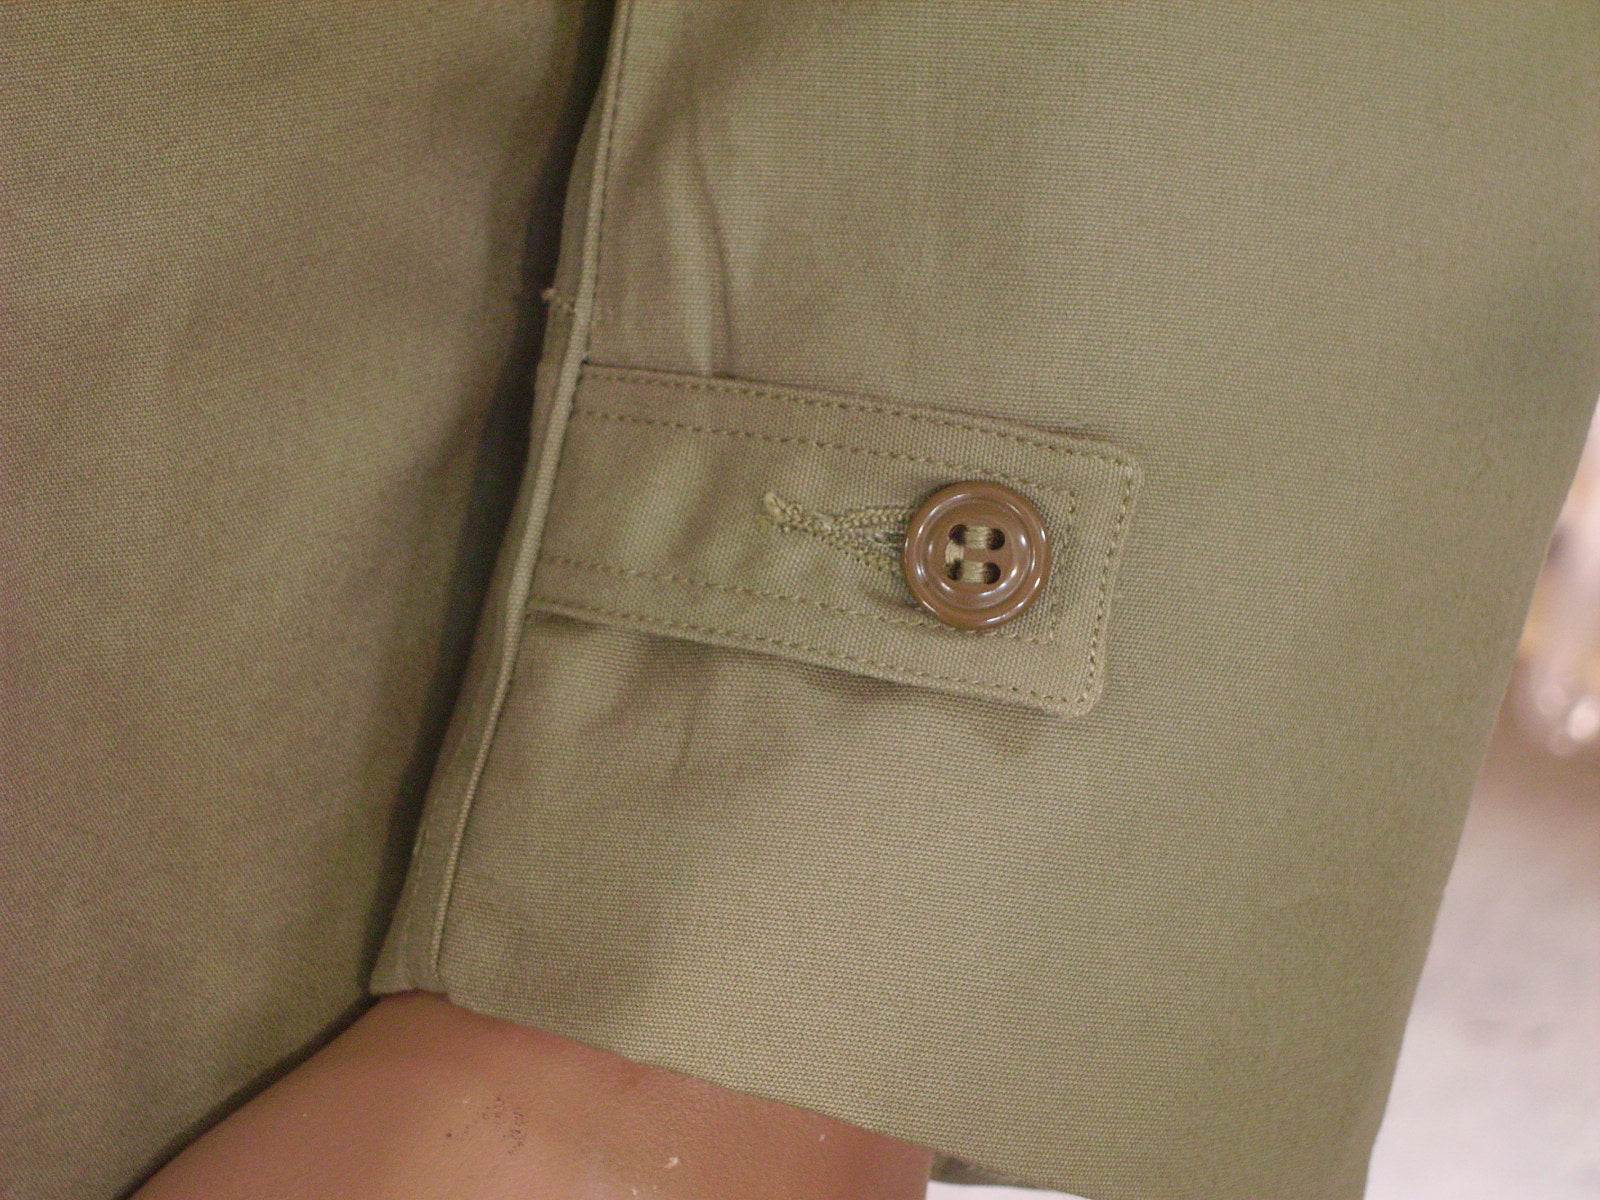 Jacket, Field, OD (M41 with epaulettes) CLOSEOUT sold as-is. All sales final.